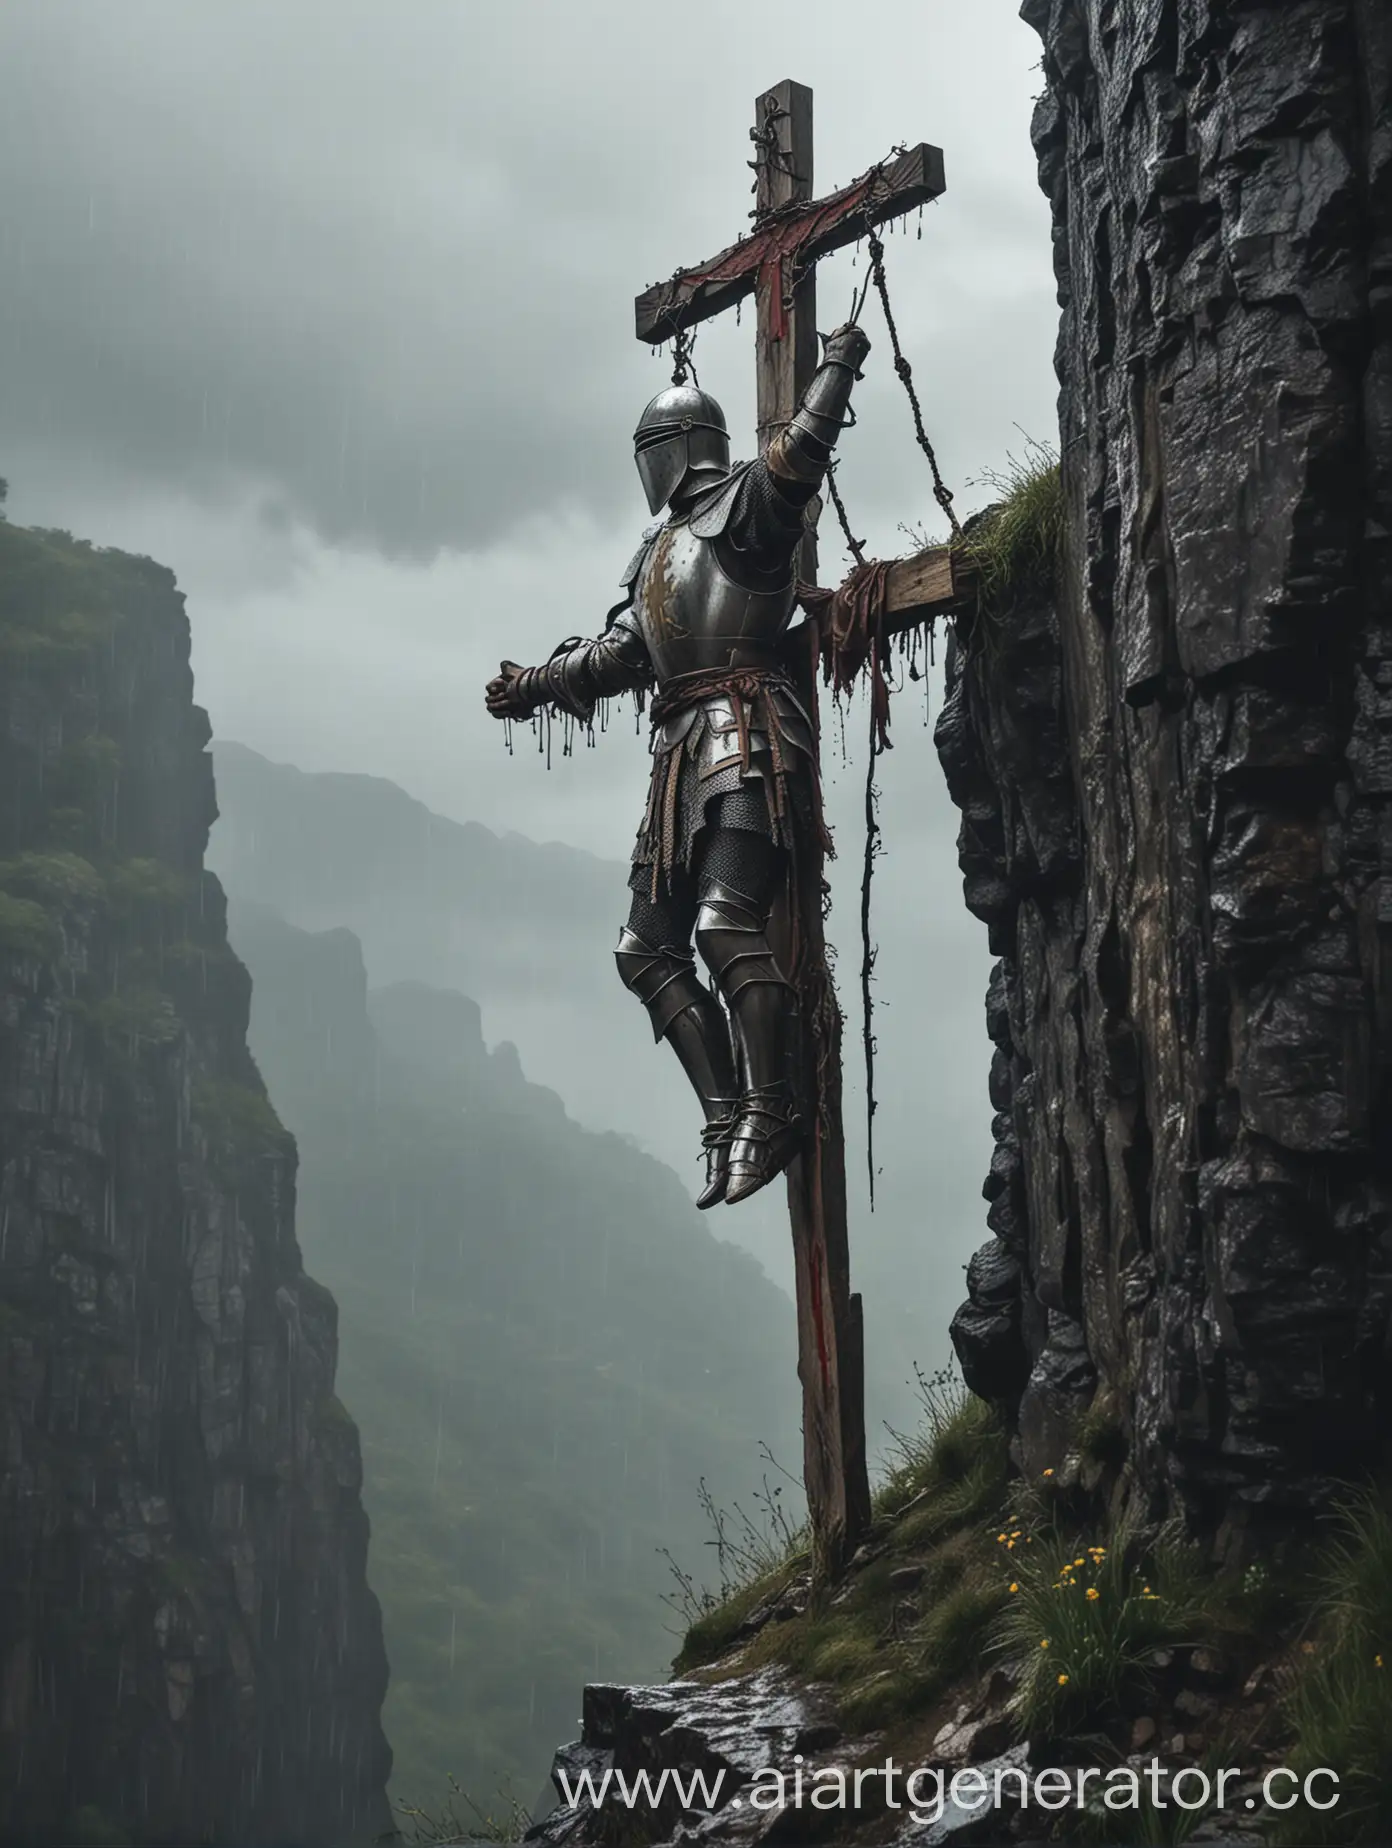 Lonely-Knight-Hangs-on-Cliff-Edge-in-Rainy-Weather